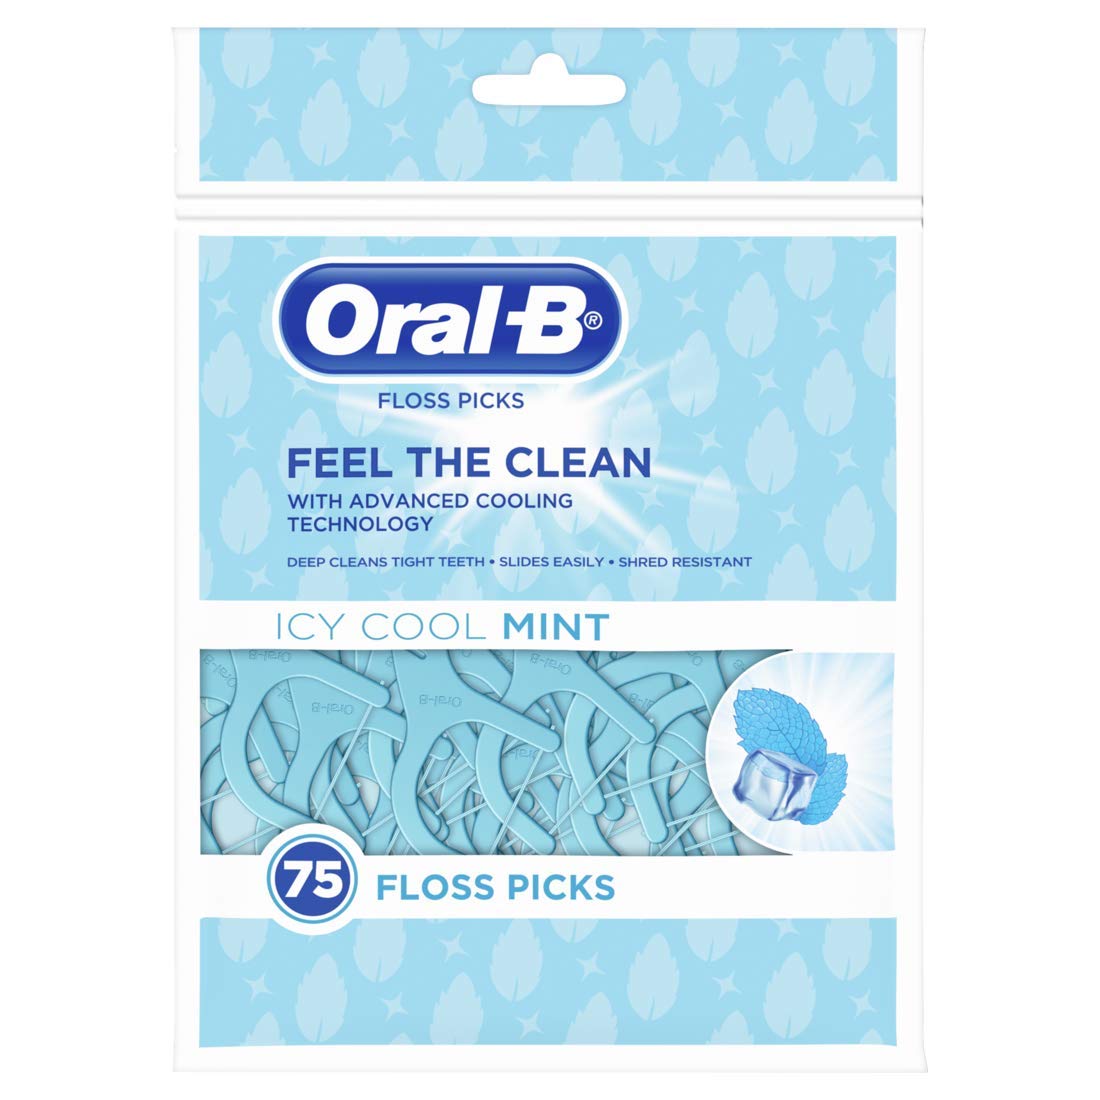 Oral-B Complete ICY Mint Flavored Floss Picks (75 Picks)